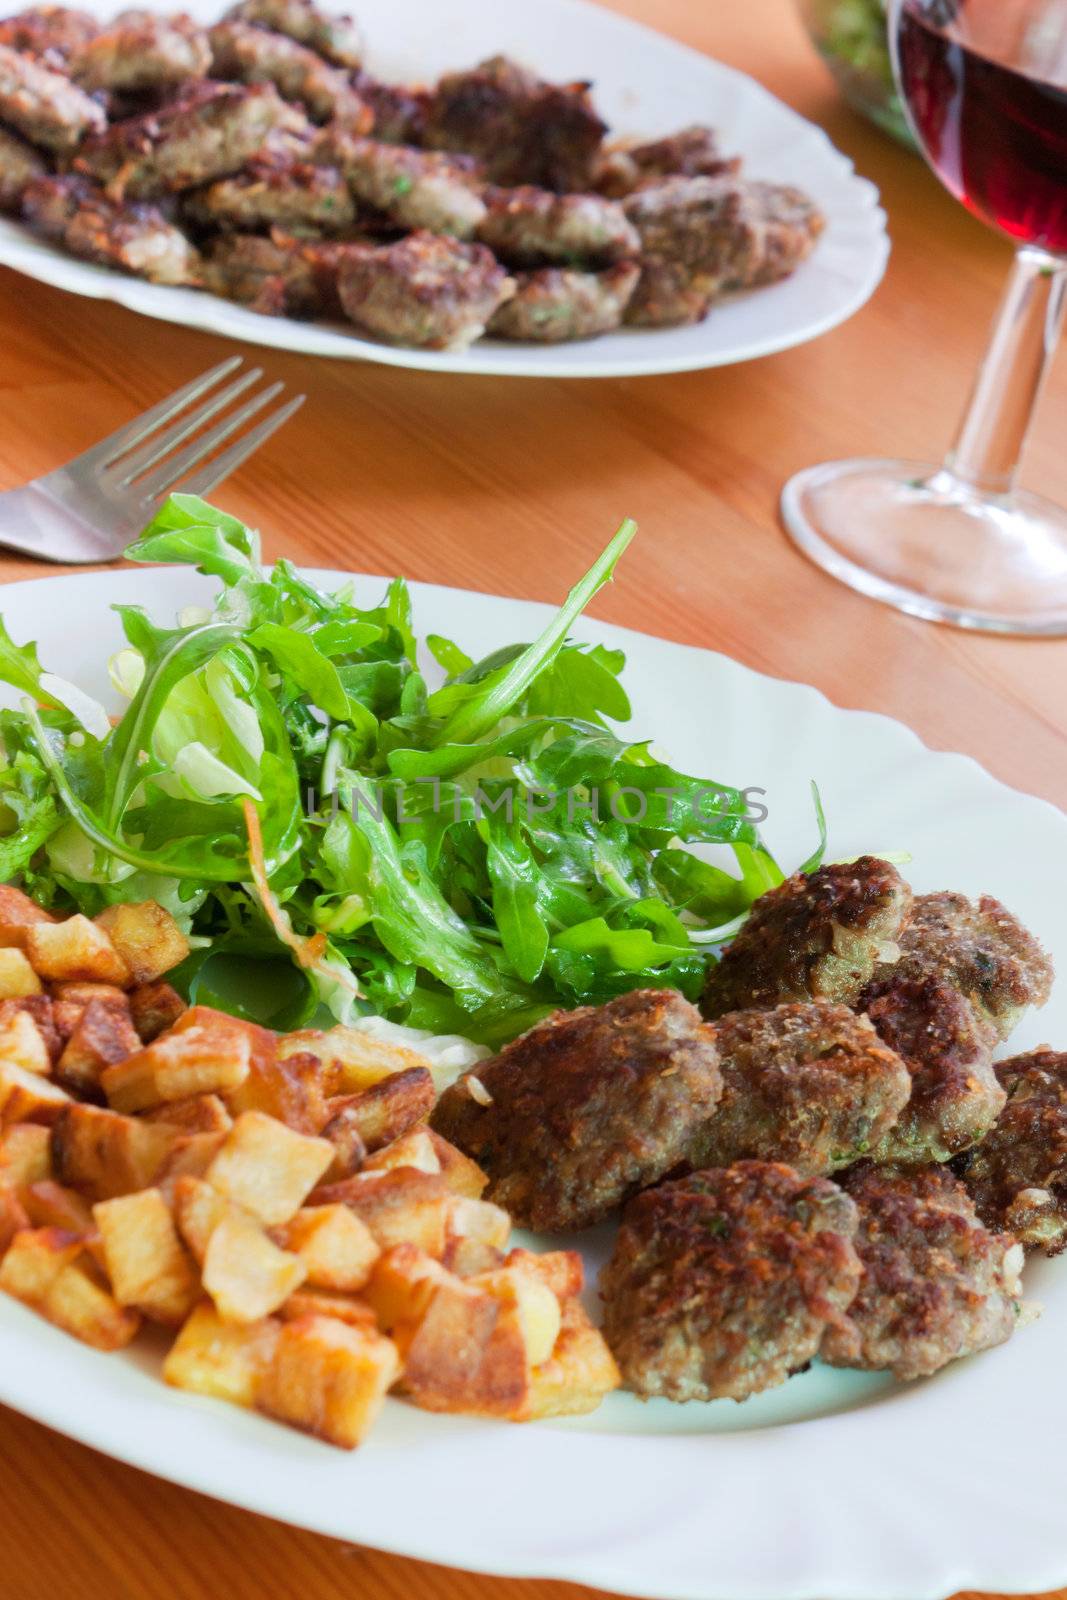 Meatballs with beef and spices, fries potatoes and salad 